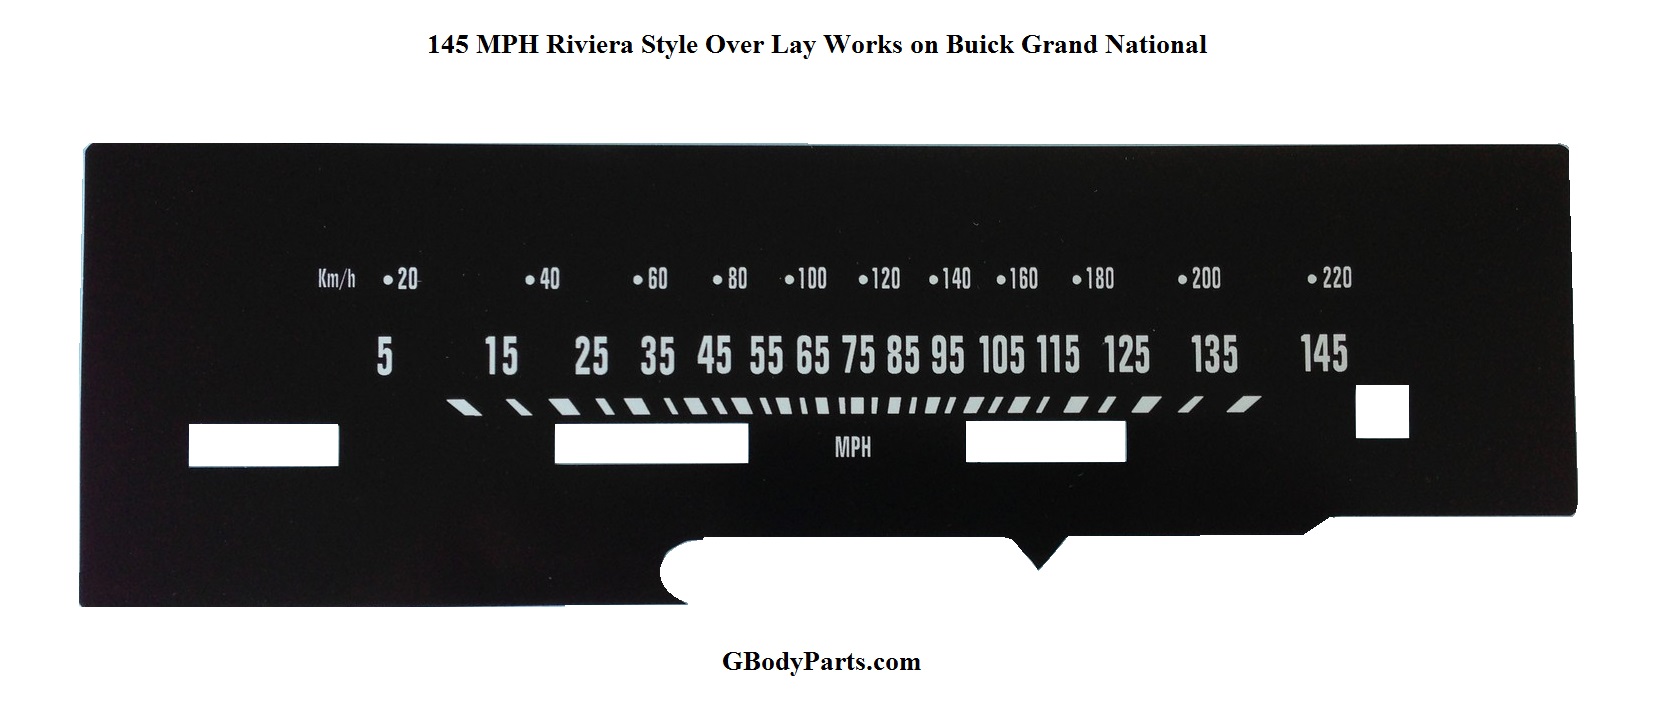 BUICK GRAND NATIONAL T-TYPE REGAL 145 MPH OVERLAY DECAL